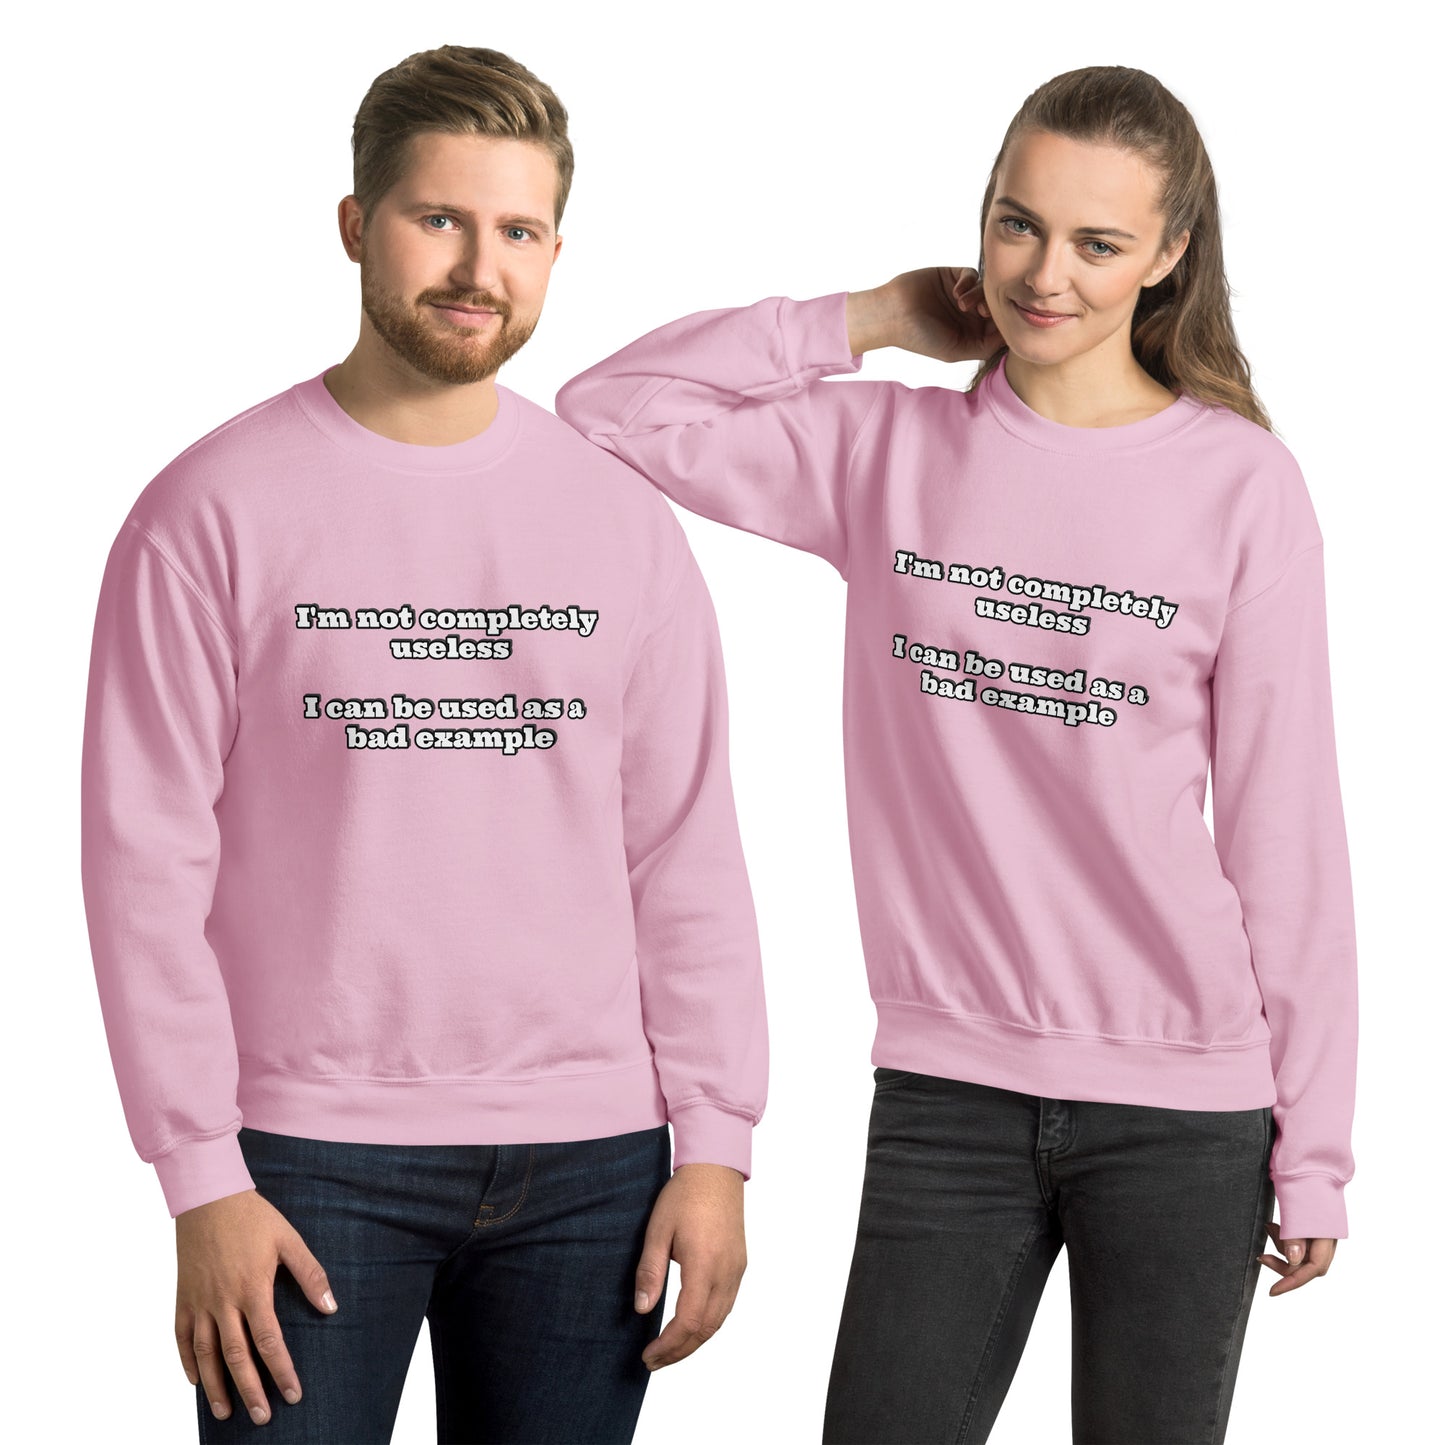 Man and women with pink sweatshirt with text “I'm not completely useless I can be used as a bad example”